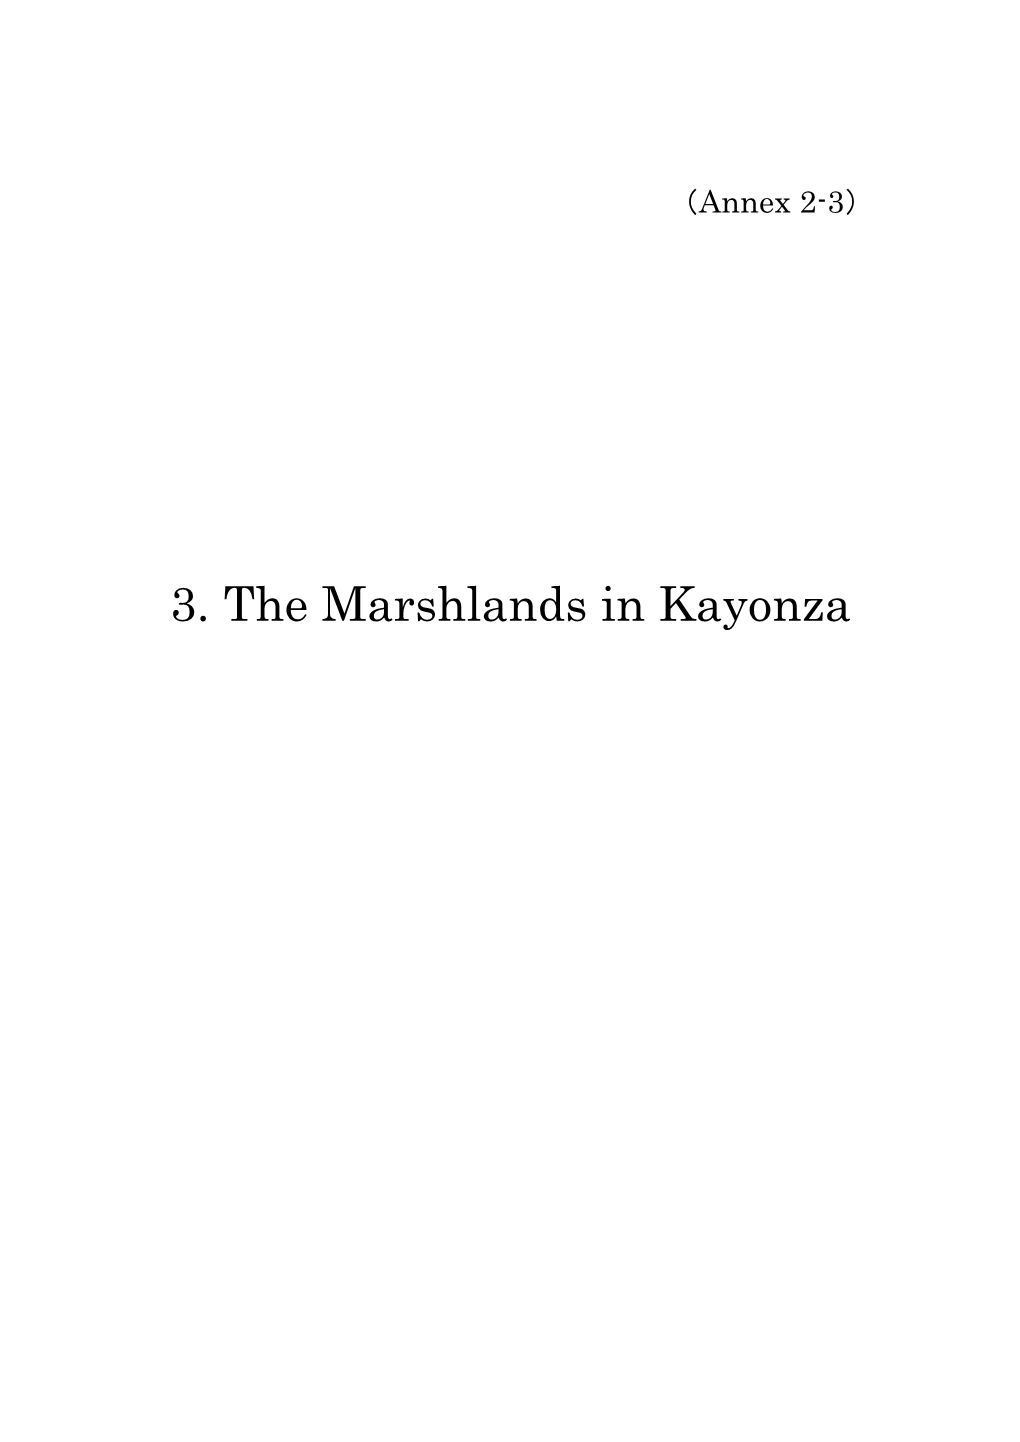 3. the Marshlands in Kayonza